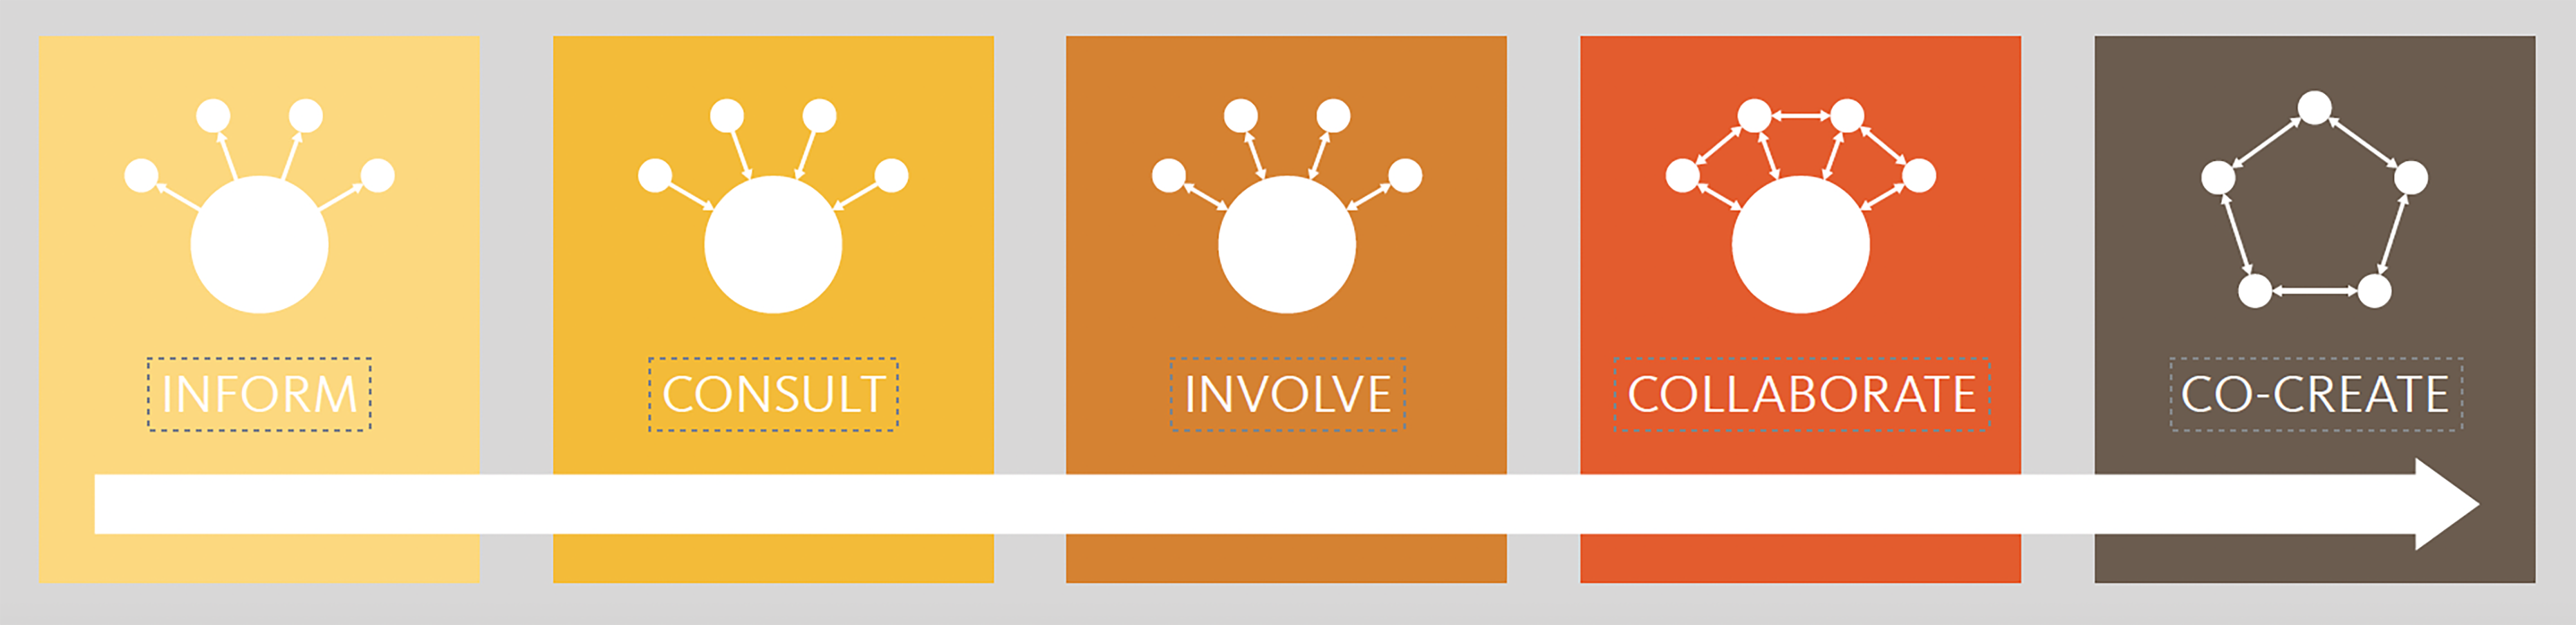 Spectrum icons - inform, consult, involve,  collaborate and finally co-create